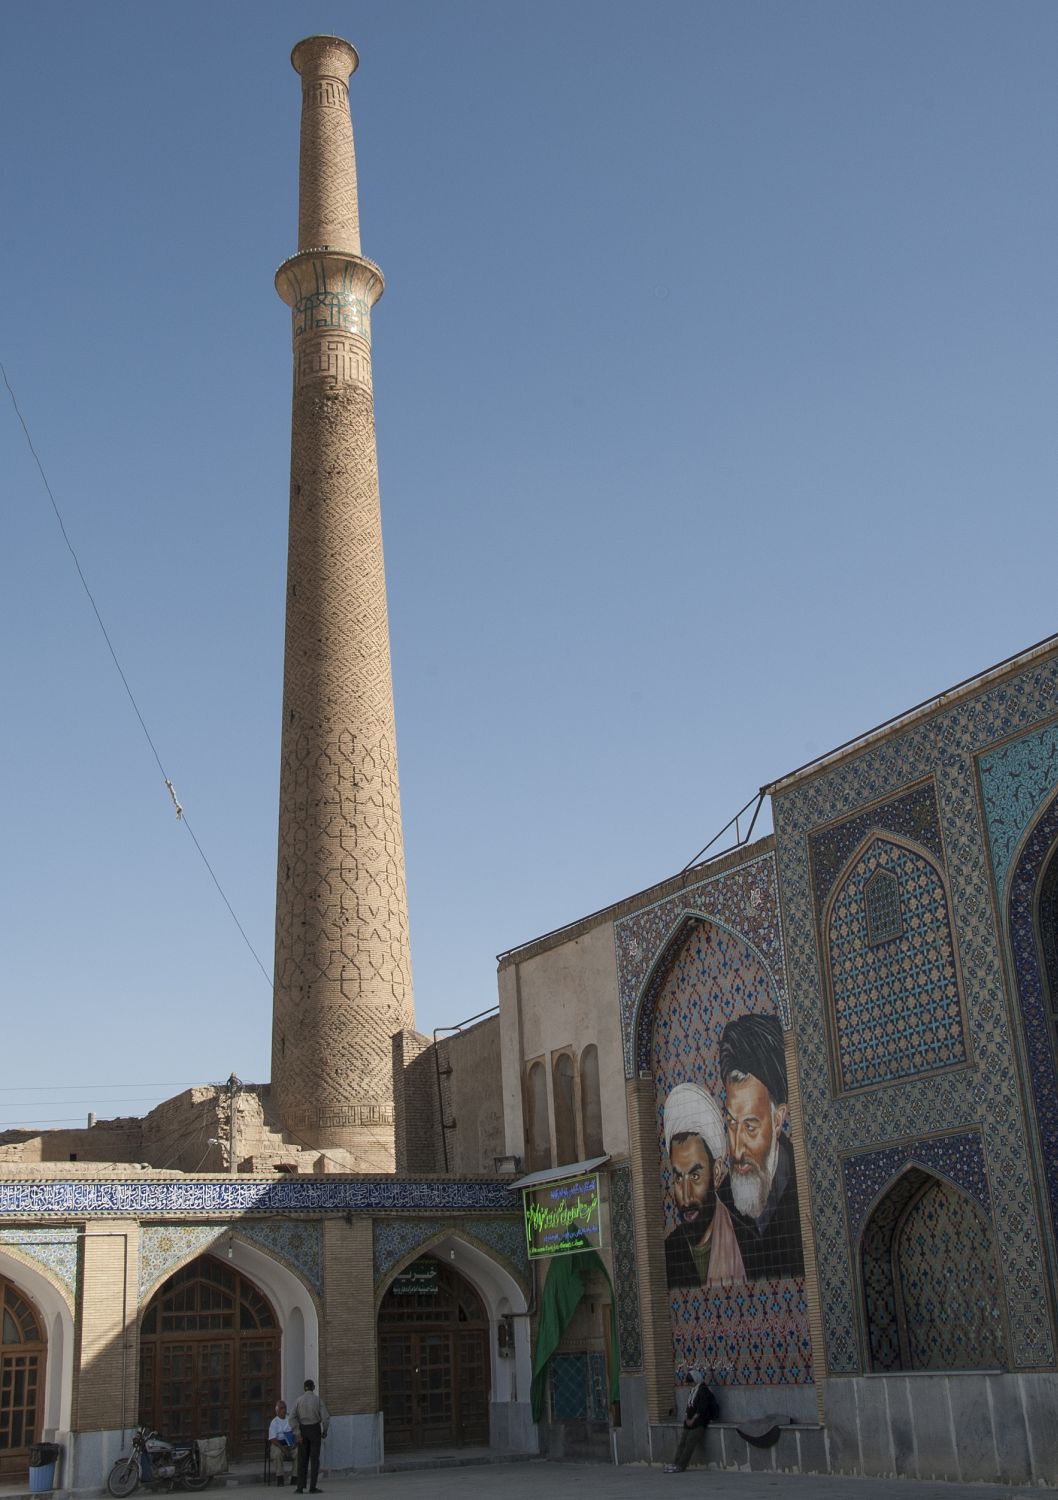 View of minaret of Masjid-i Ali from courtyard of Harun-i Vilayat Mosque.